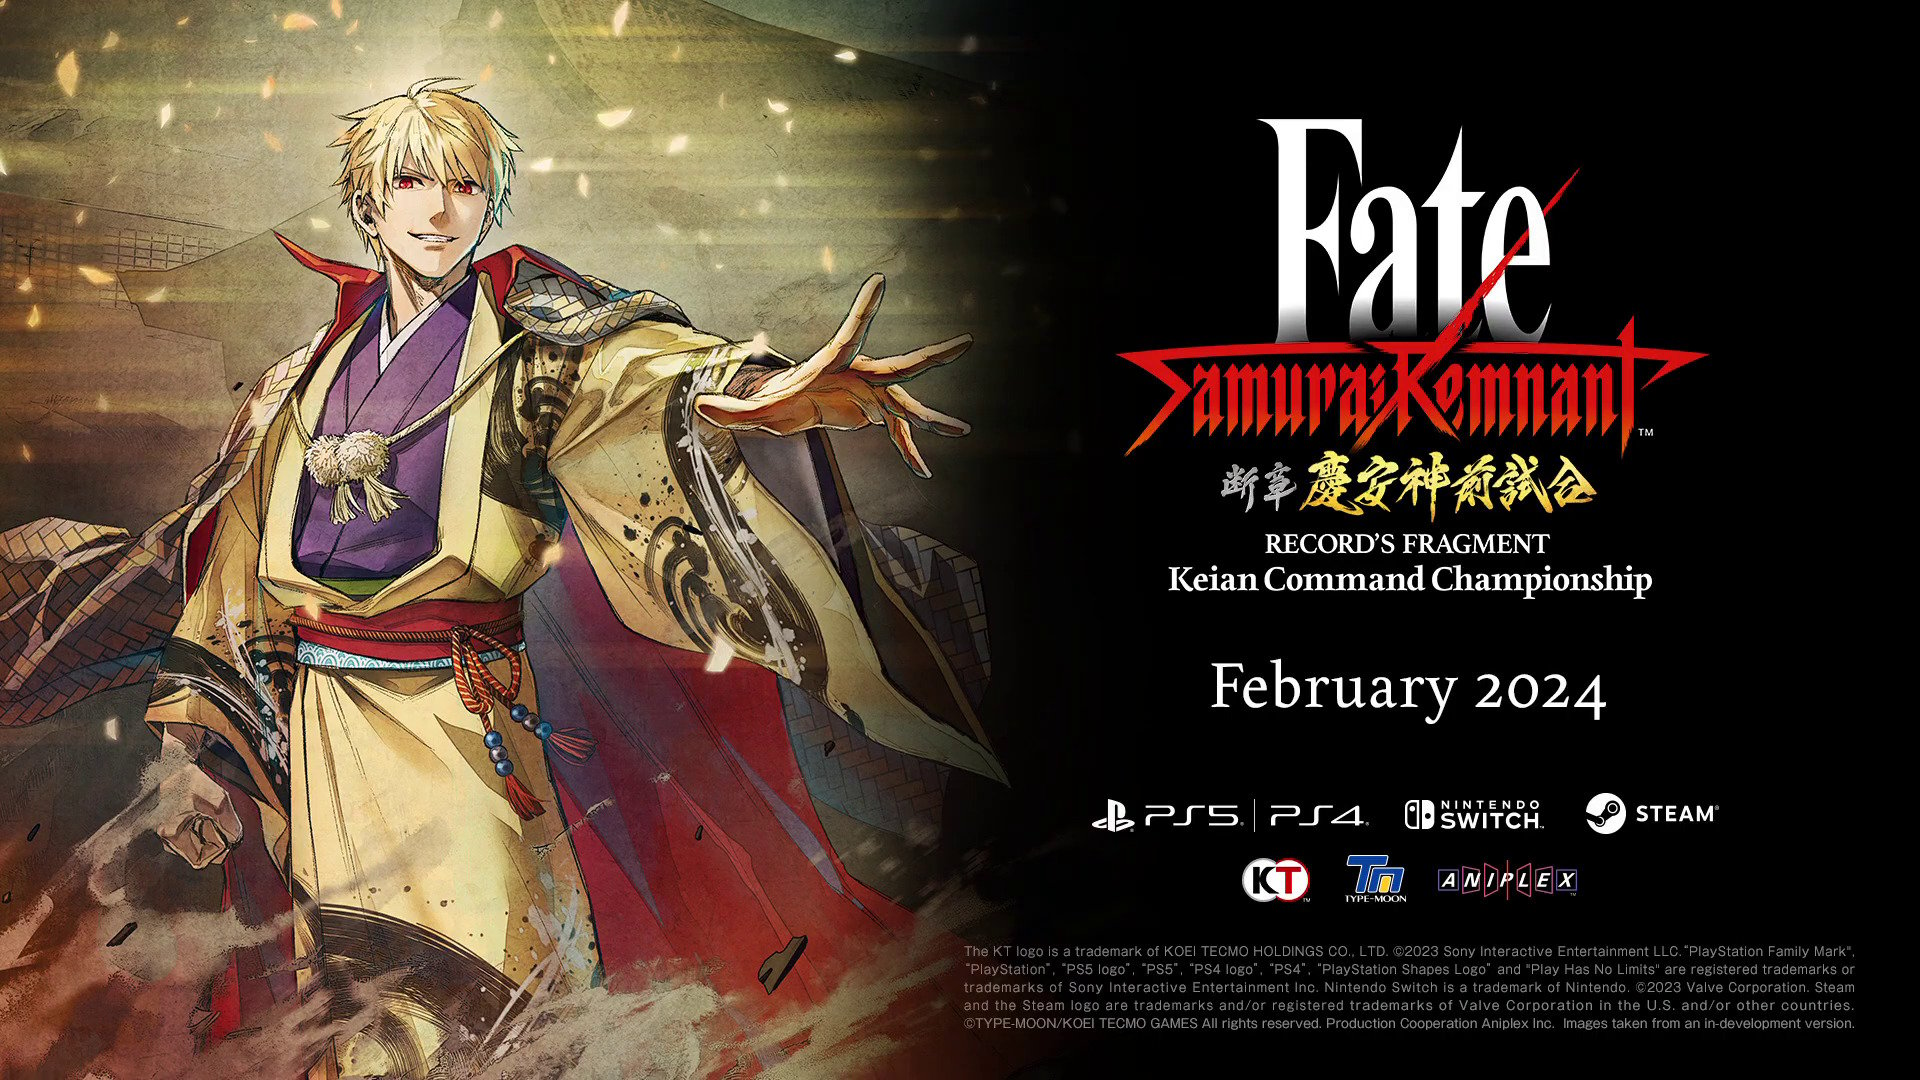 #
      Fate/Samurai Remnant DLC ‘Record’s Fragment: Keian Command Championship’ launches in February 2024